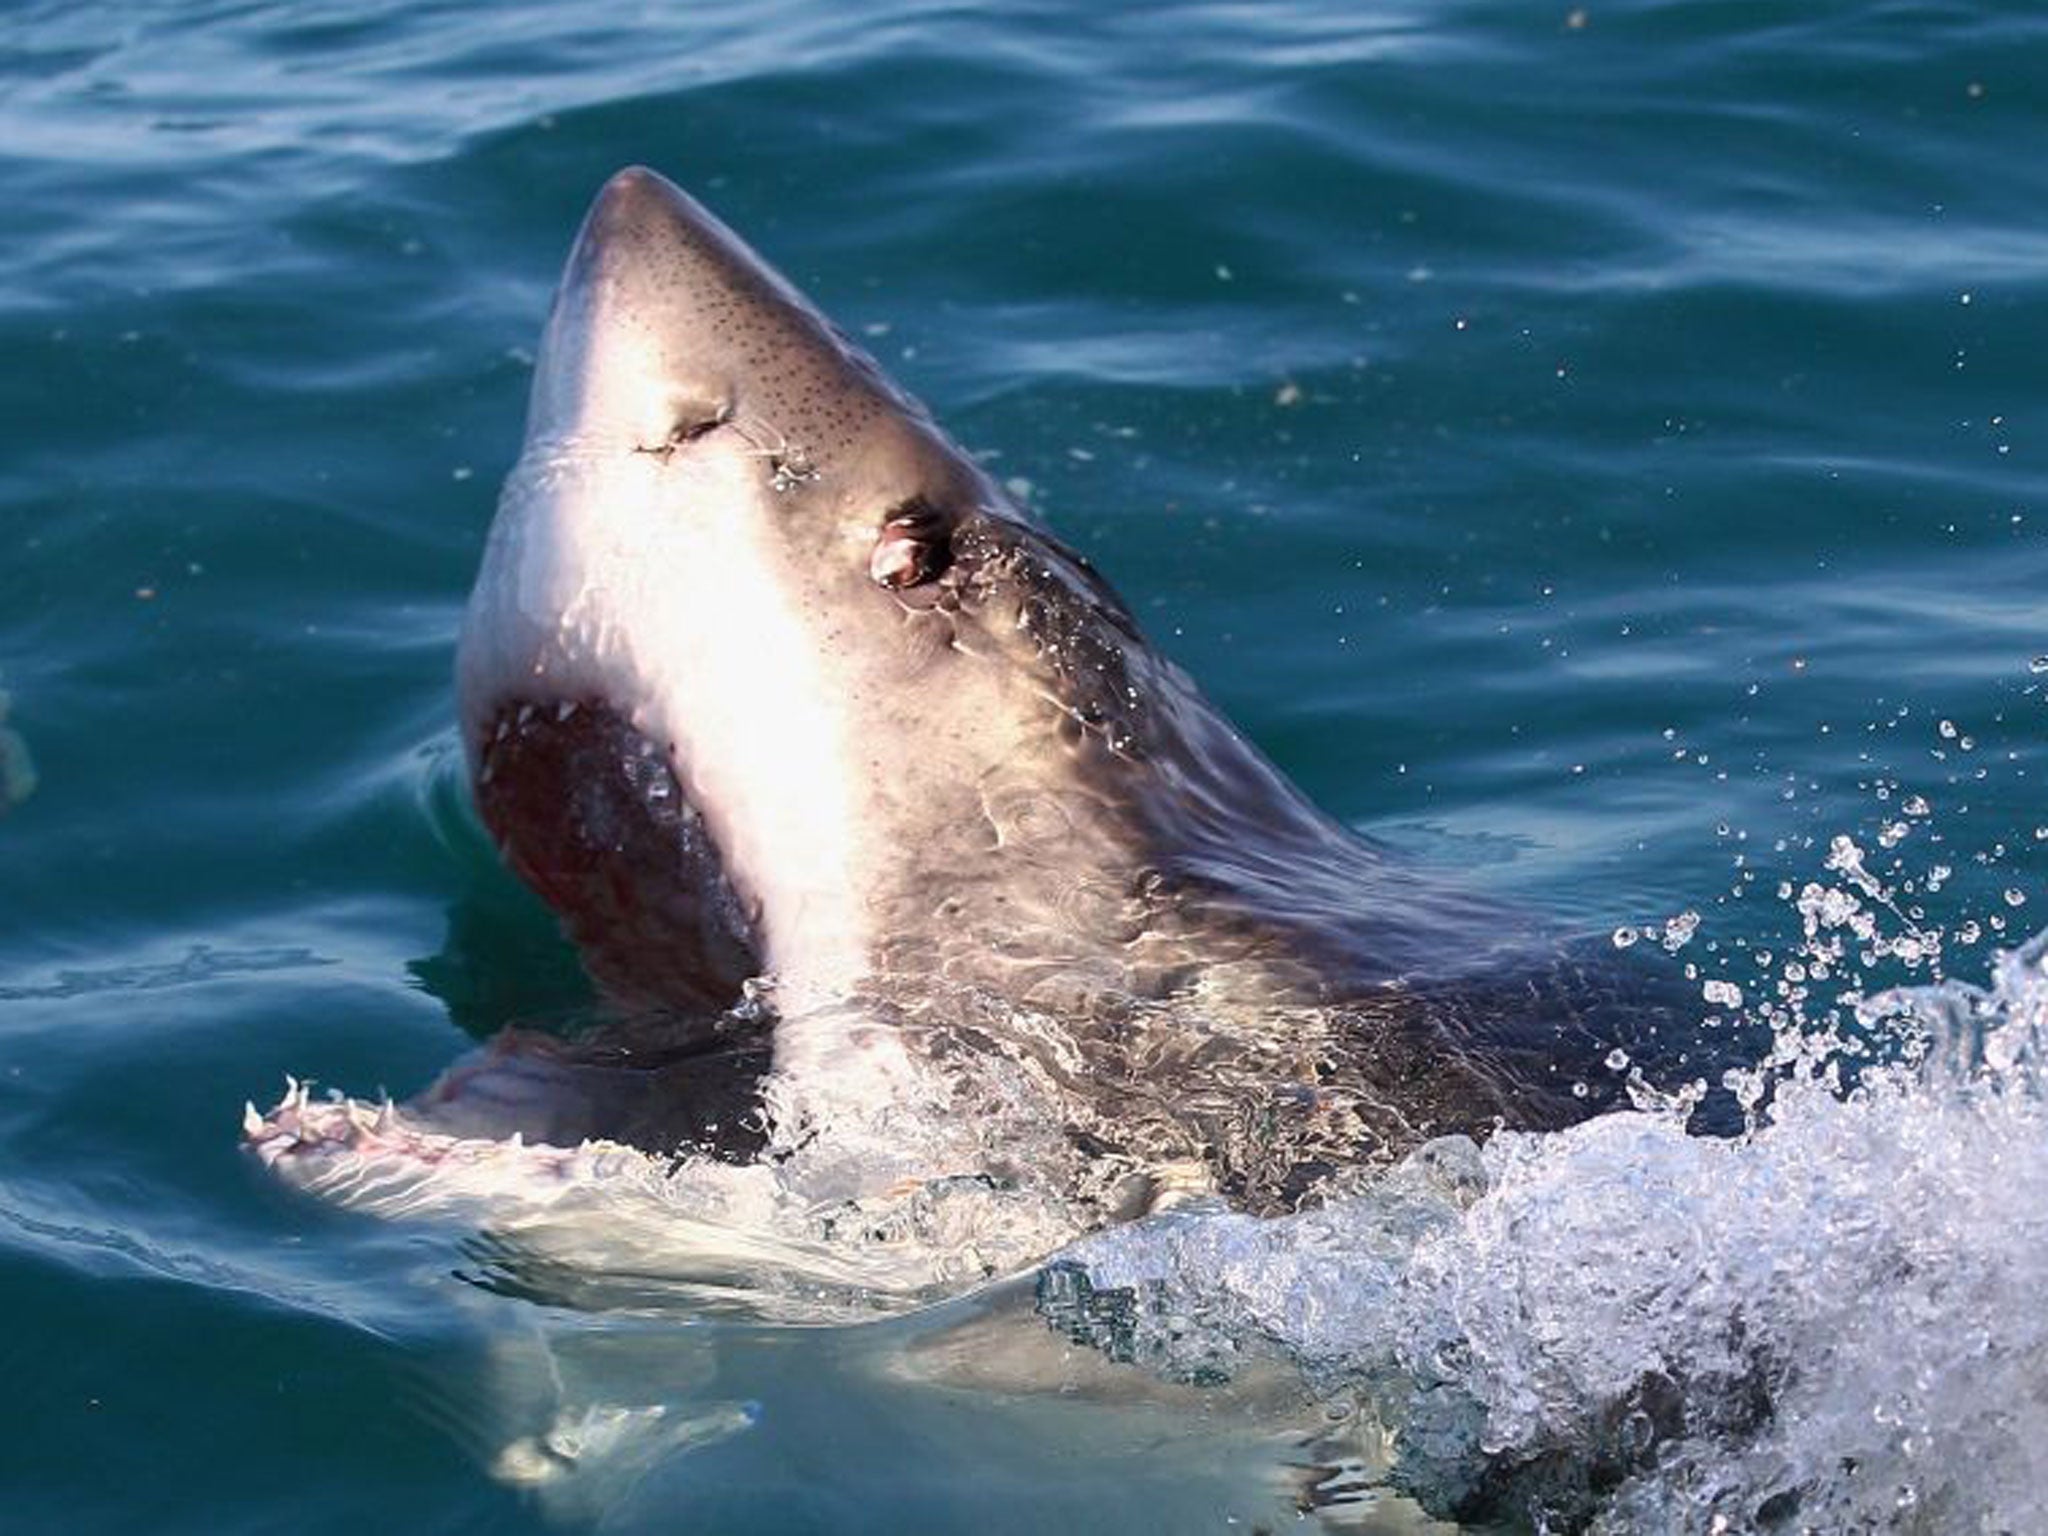 The shark struck when the female tourist was swimming with a friend